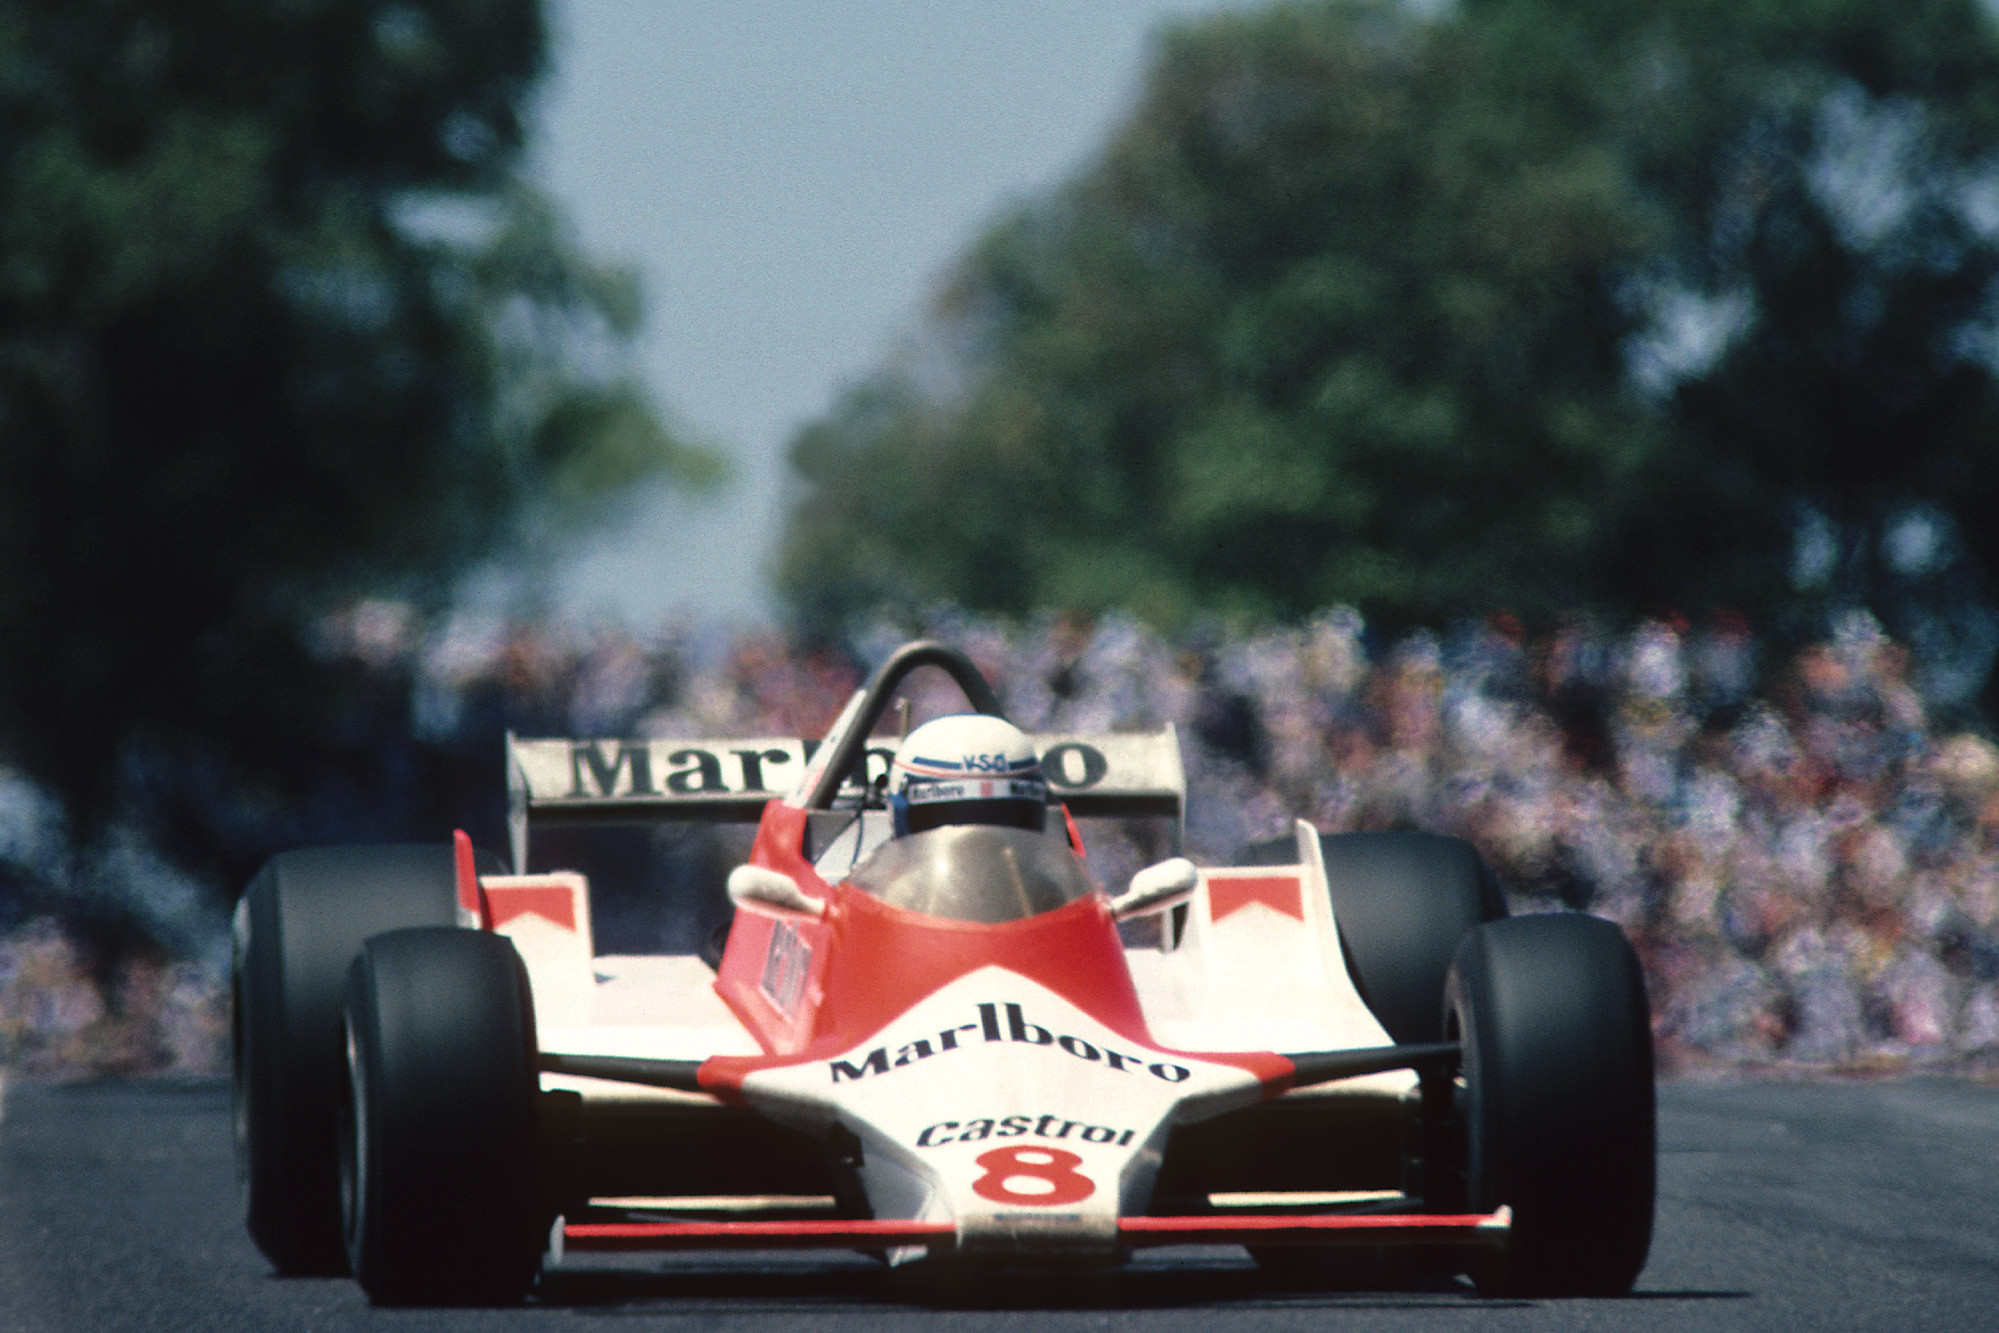 Alain Prost at the Autodromo Municipal Ciudad de Buenos Aires in Argentina on 13 January 1980.